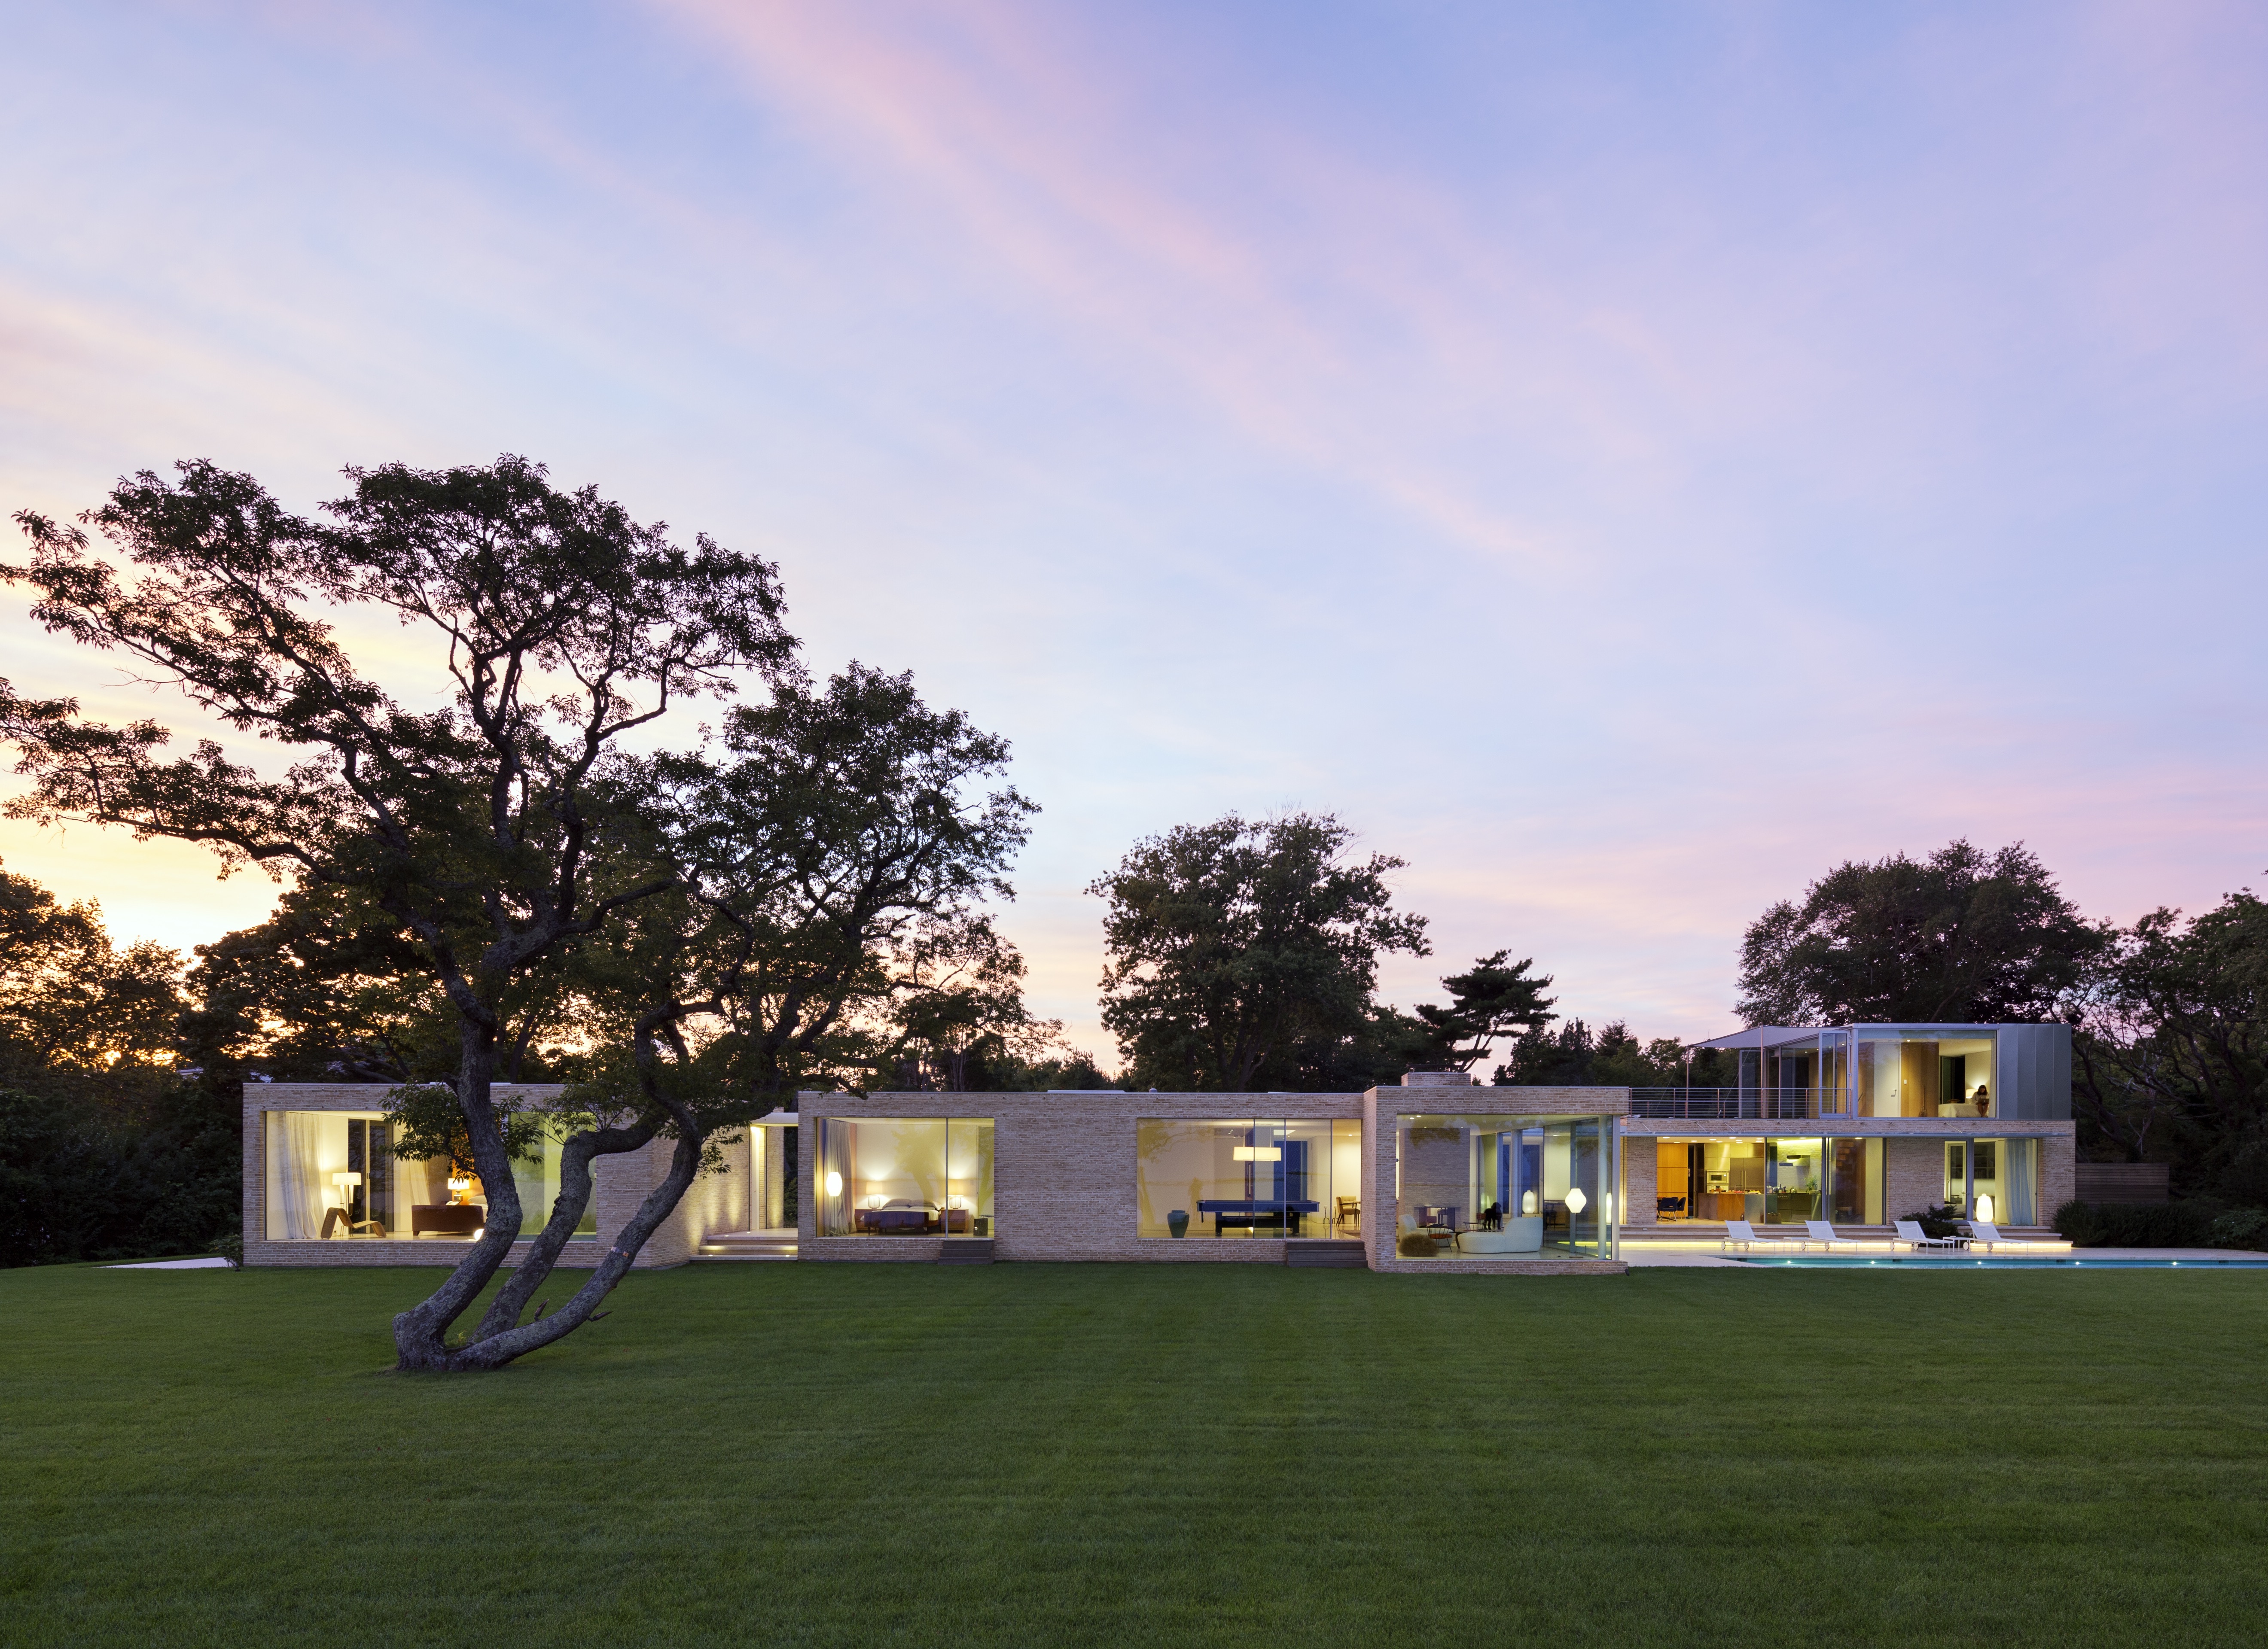 The Bellport House on the south shore of Long Island, designed by Toshihiro Oki.